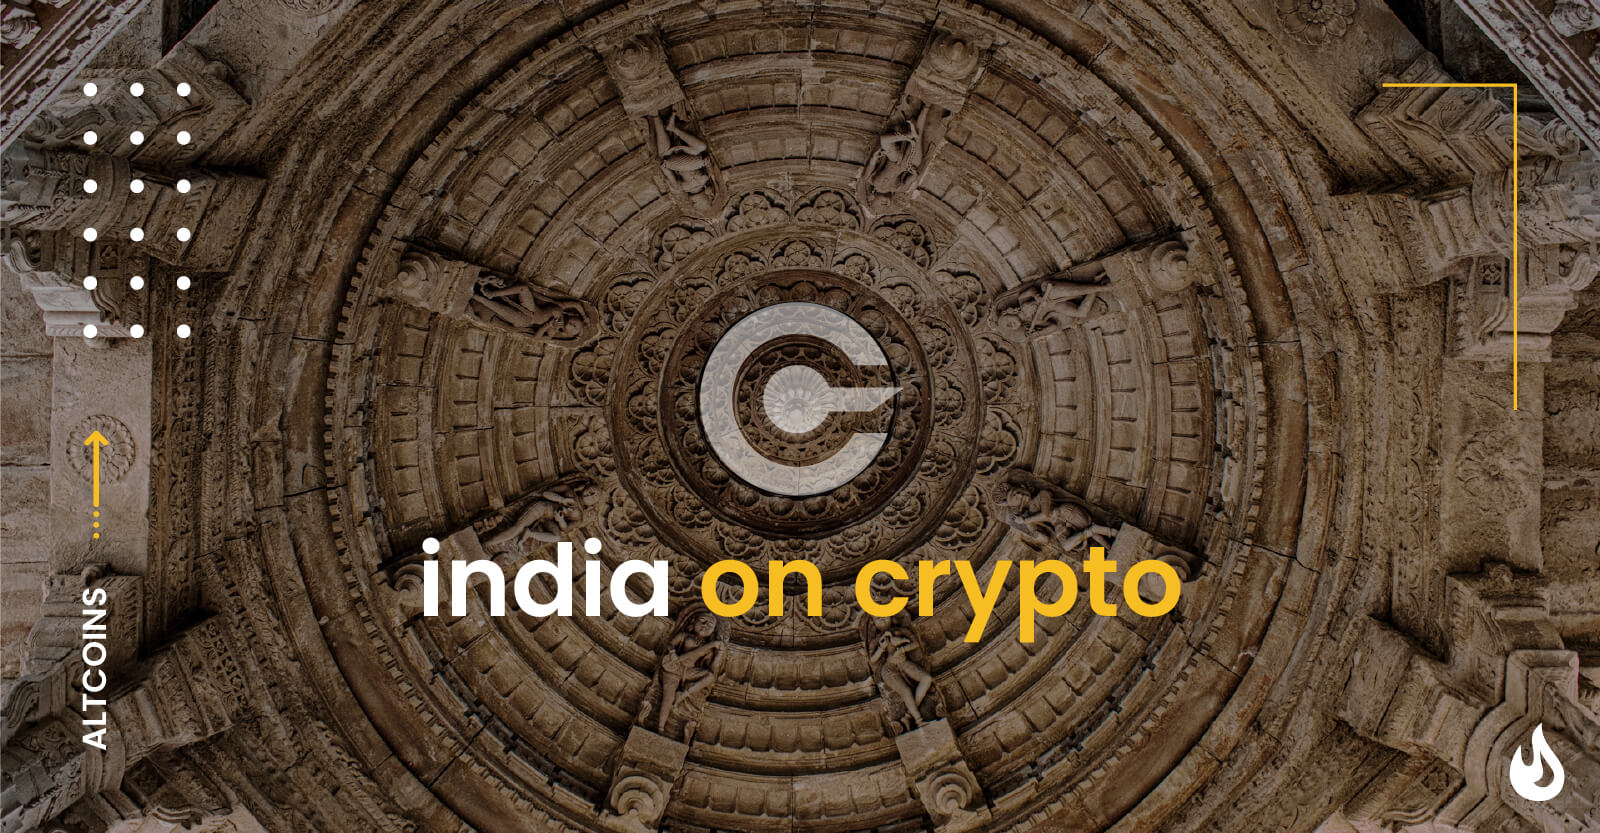 indias stance towards crypto currency